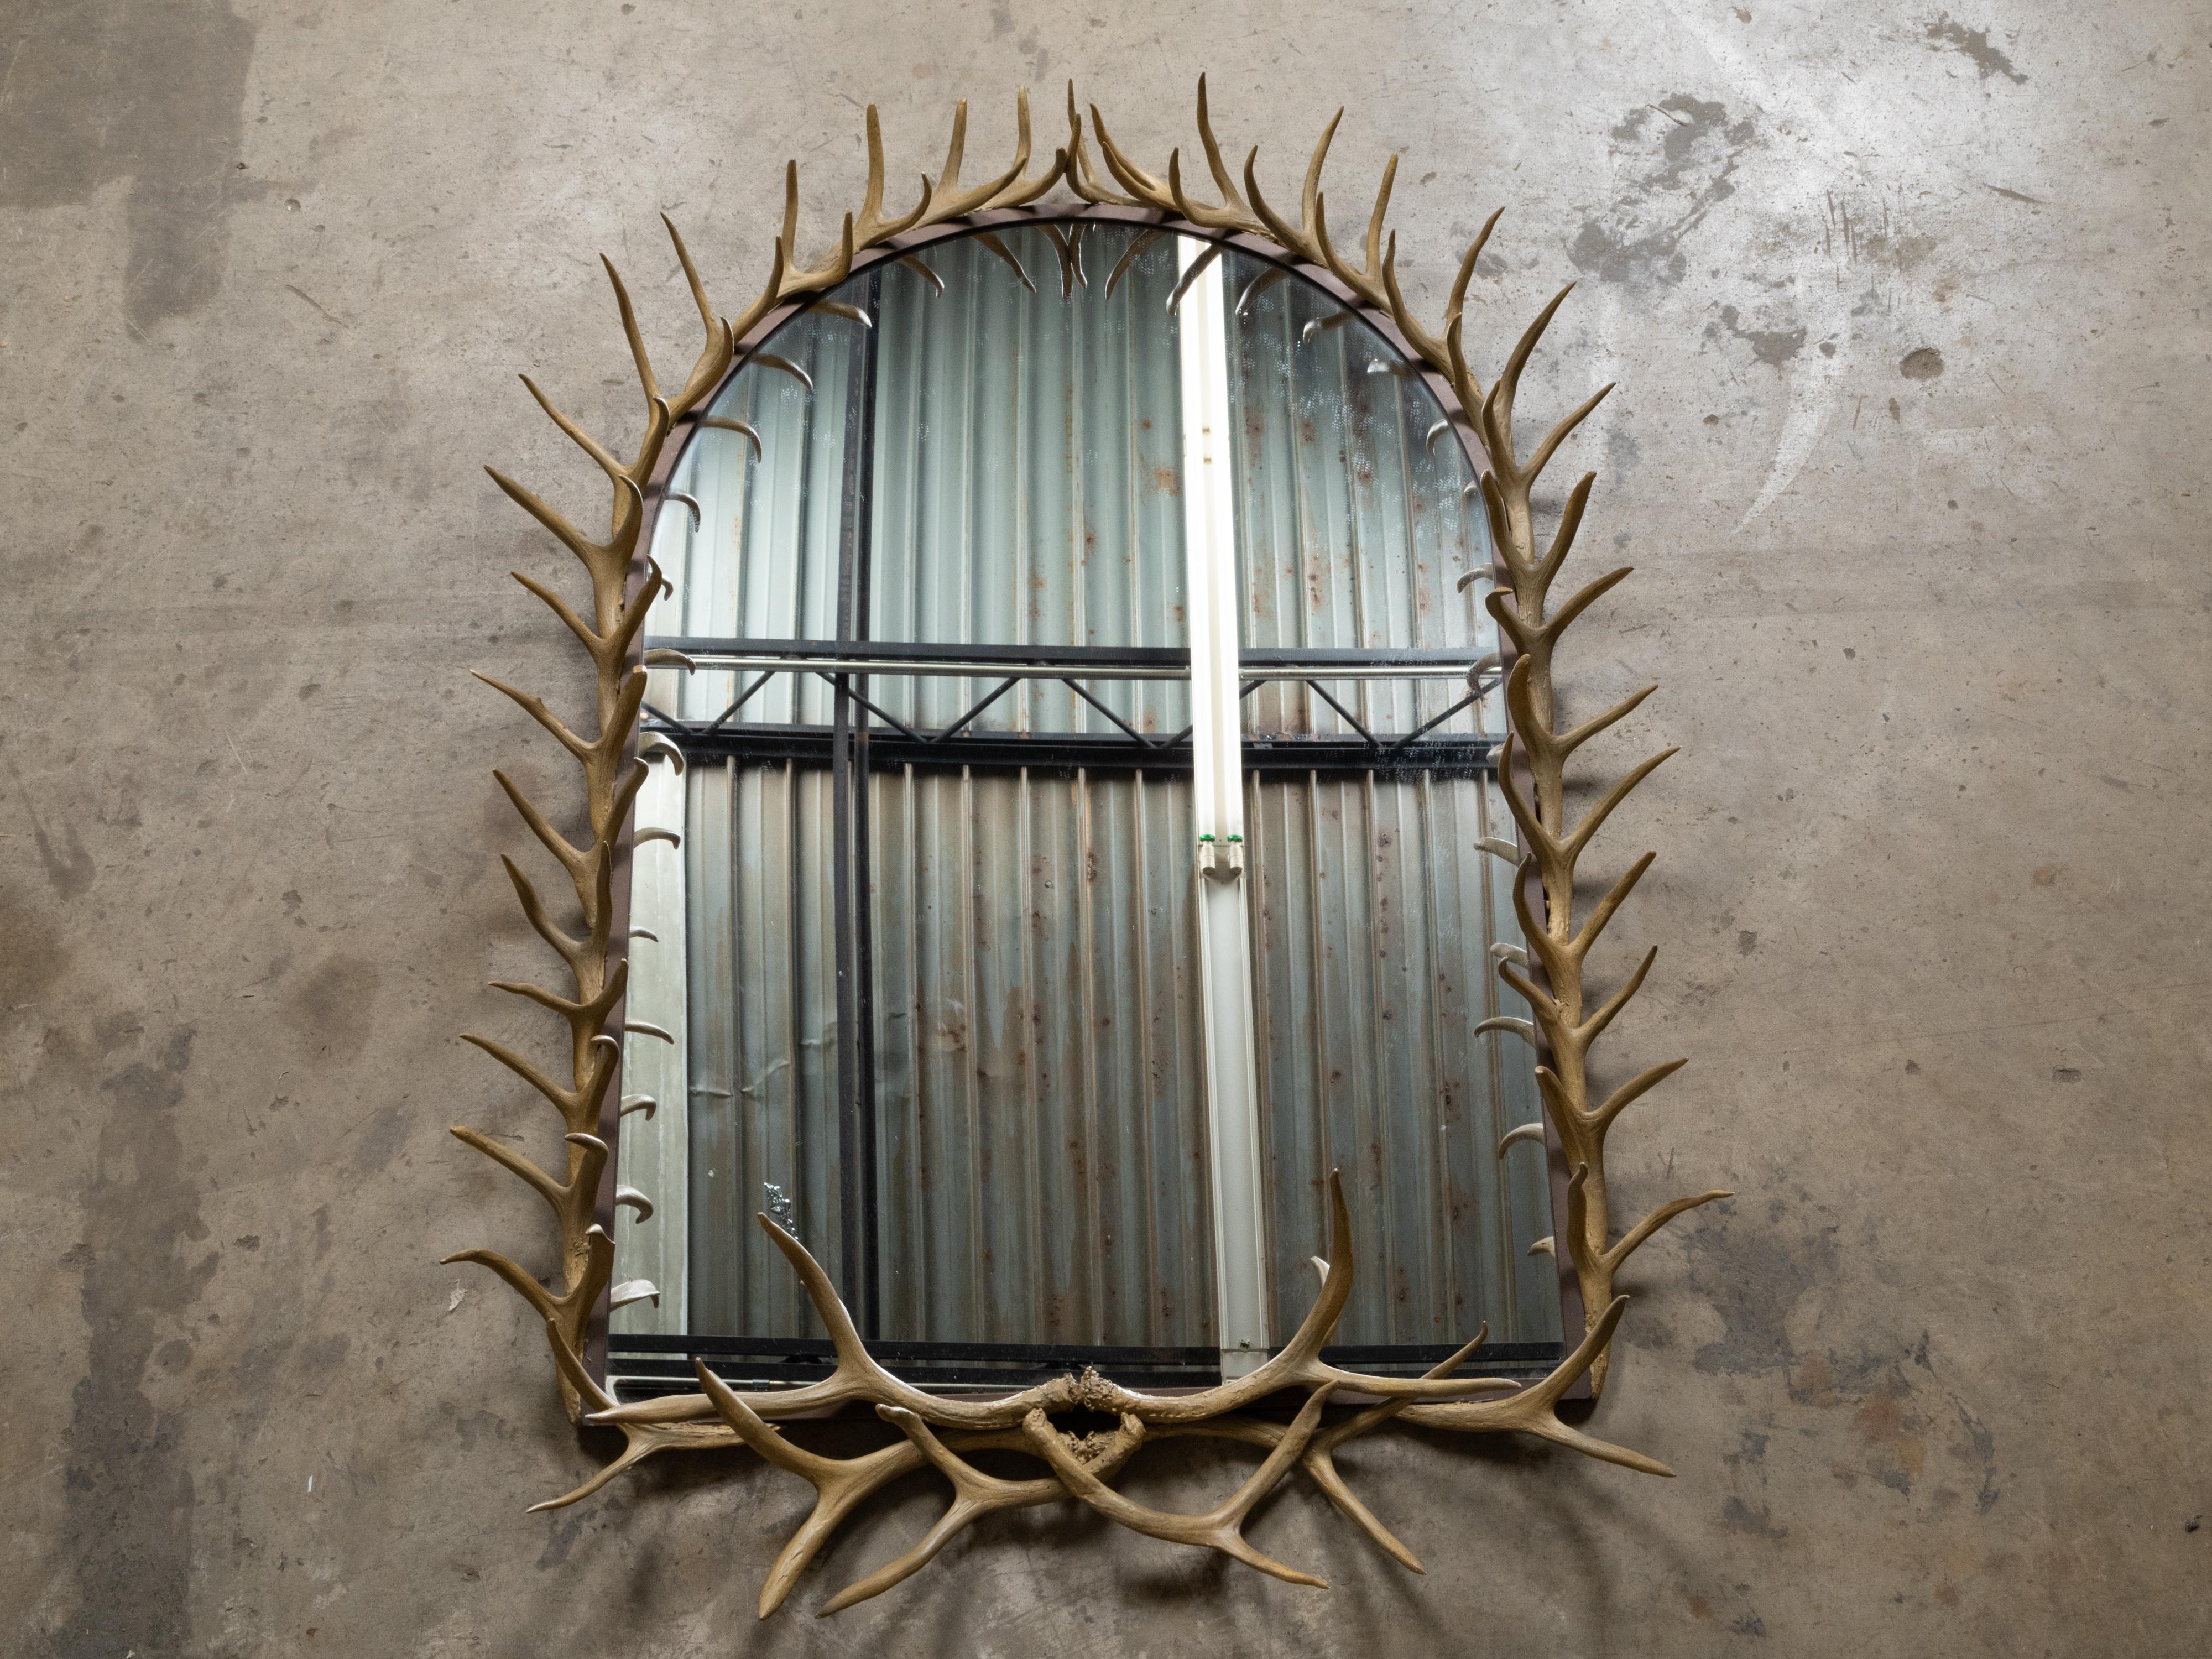 A rustic antler wall mirror from the mid 20th century with clear mirror plate and arching frame. This mid-20th century rustic antler wall mirror is an exquisite piece that combines the allure of natural materials with functional artistry. The frame,